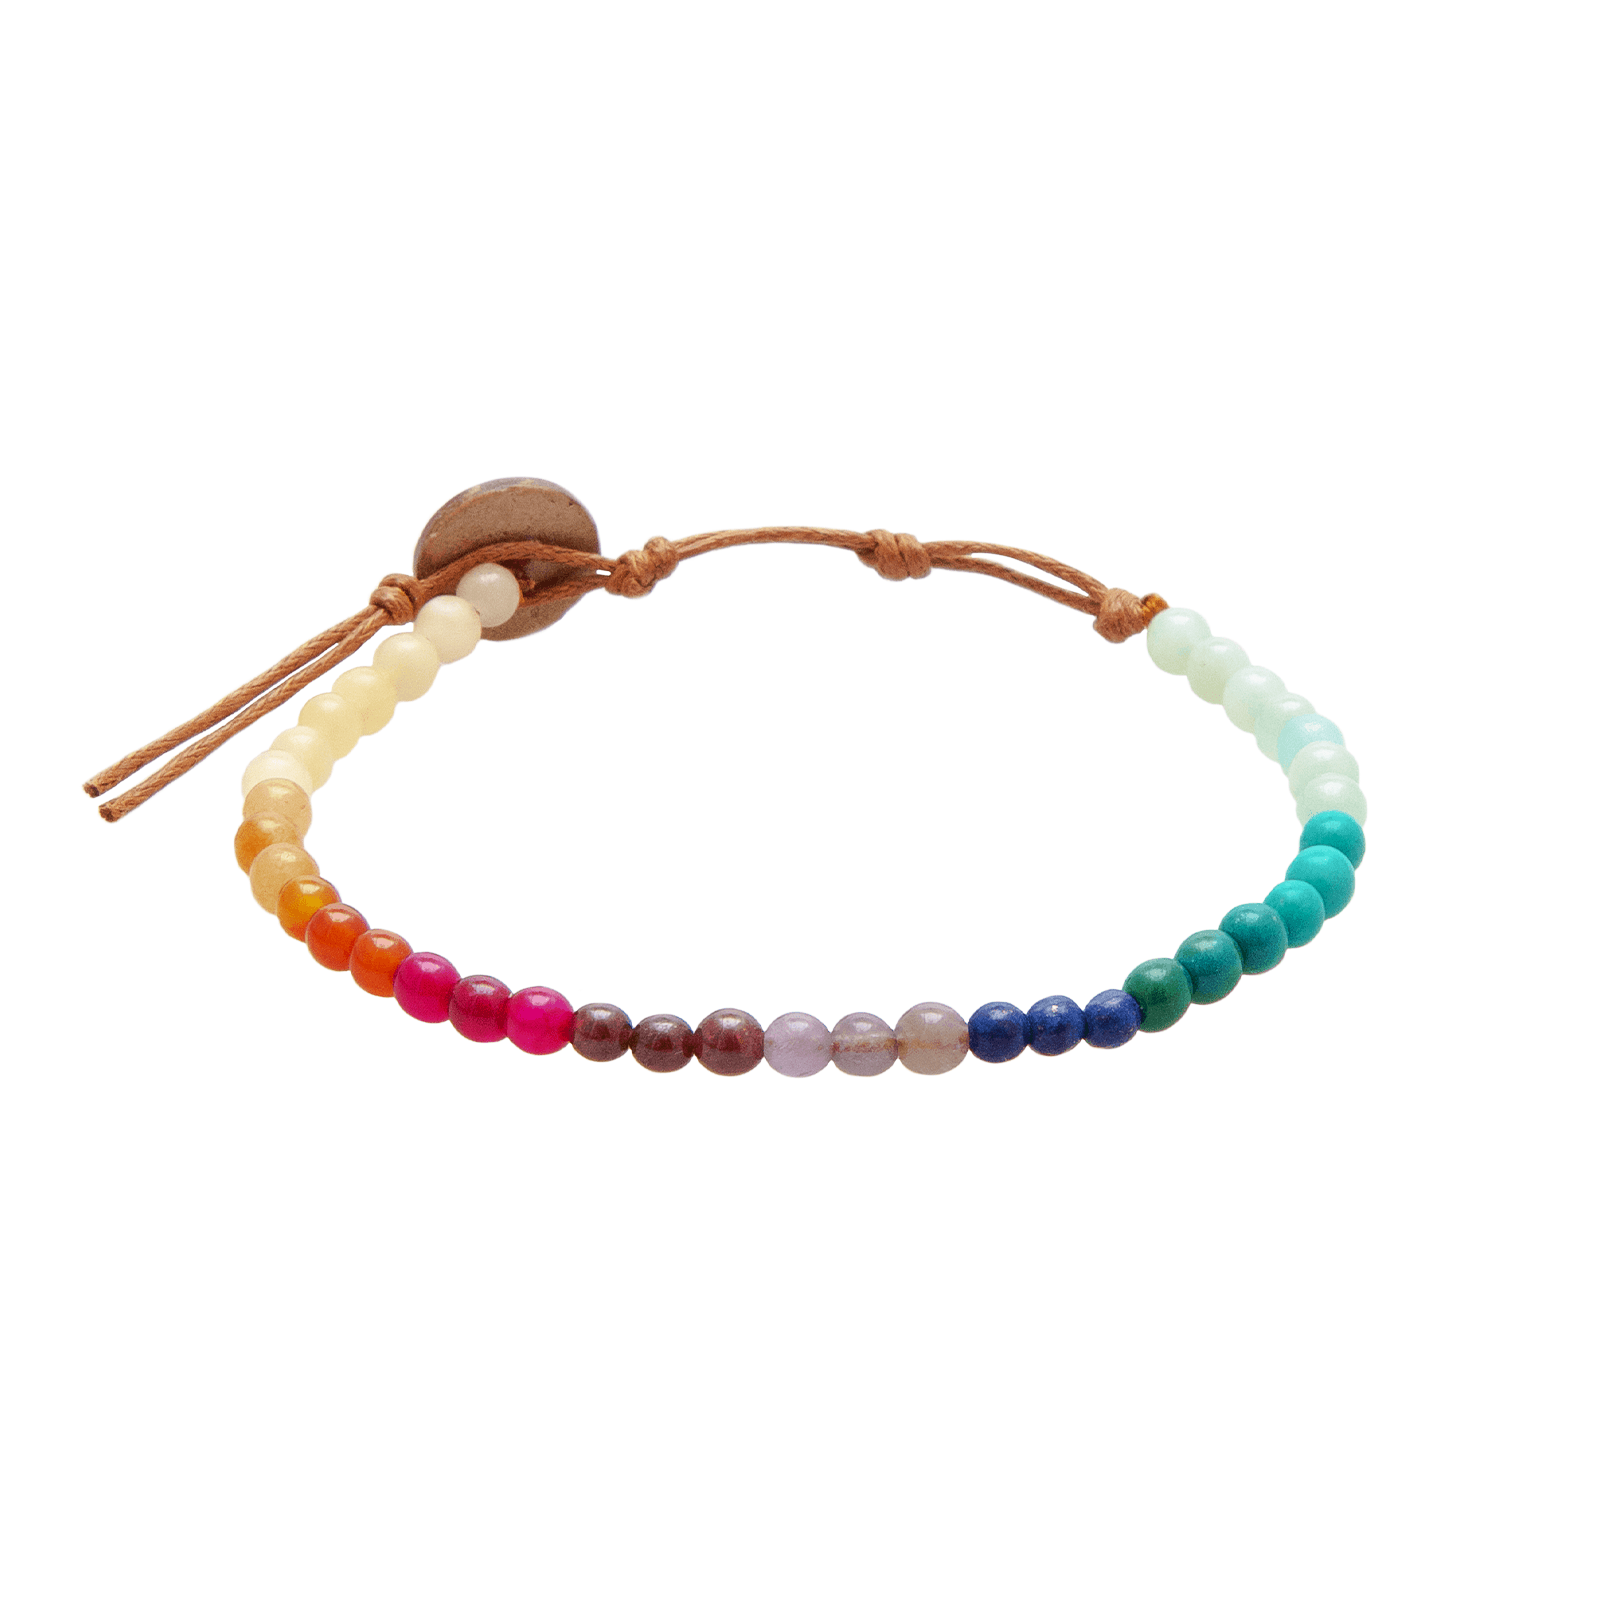 4mm multicolor stone healing bracelet with a coconut button closure